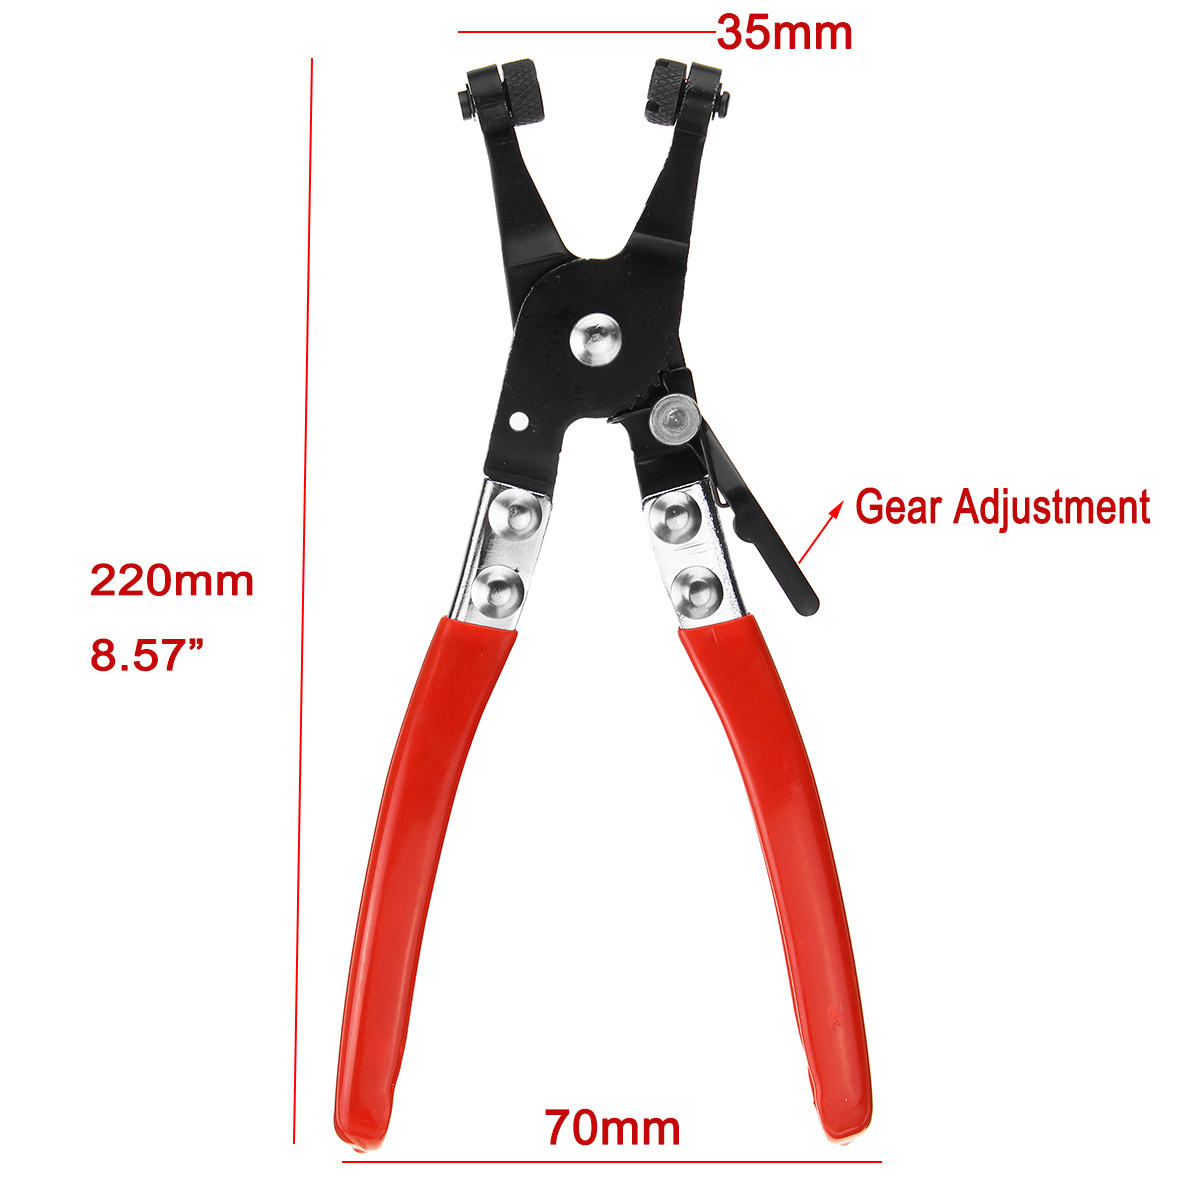 Angled Flat Band Hose Clamp Pliers Pipe Hose Clamp Plier With Locking Ratchet